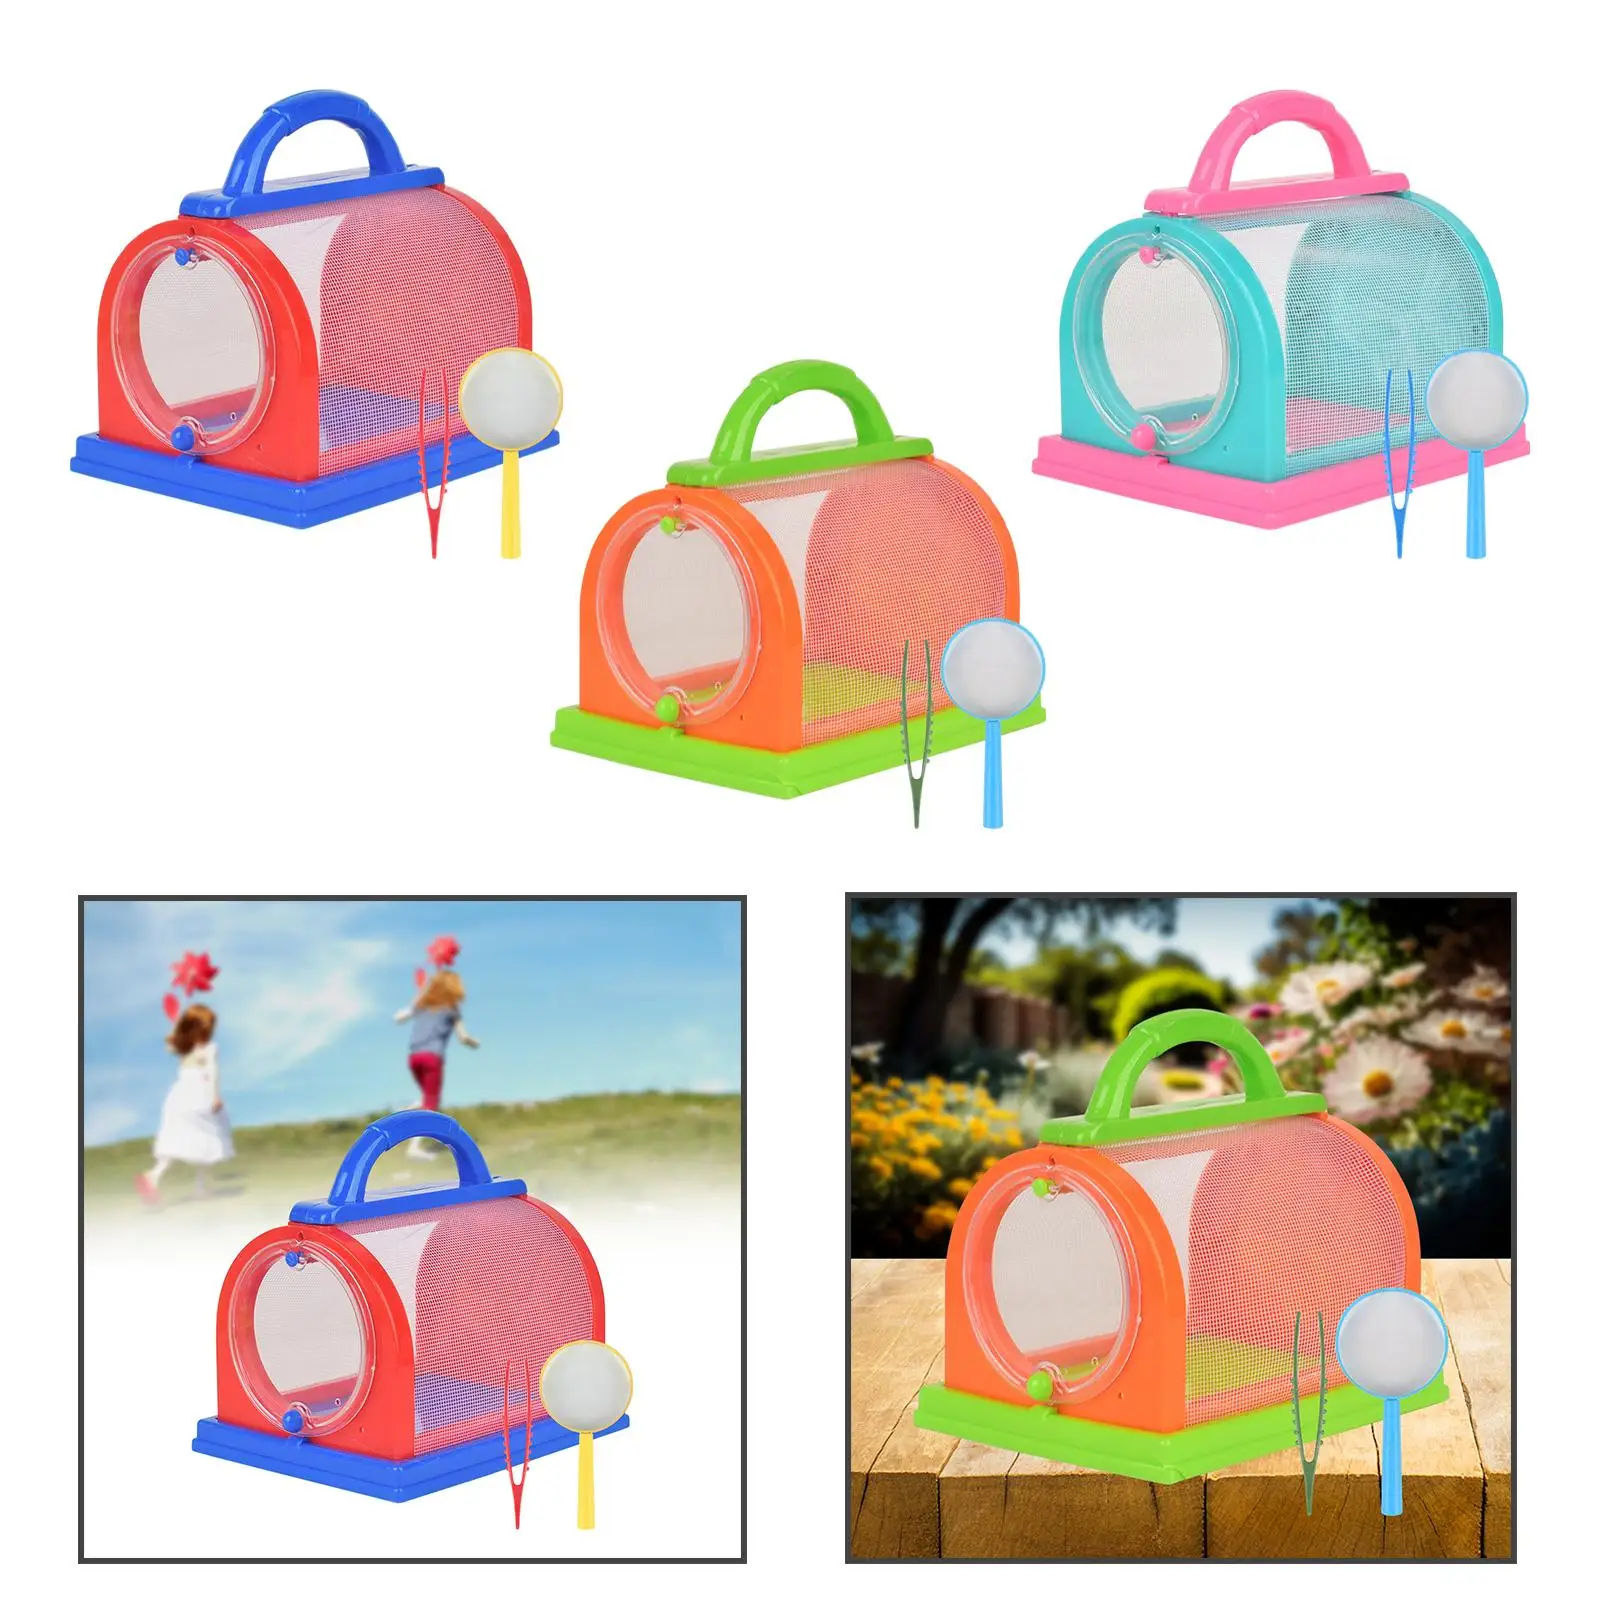 Butterfly Observation Box with Magnifying Glass Cage Observe Viewer Container for Outdoor Activities Backyard Camping Childs Toy